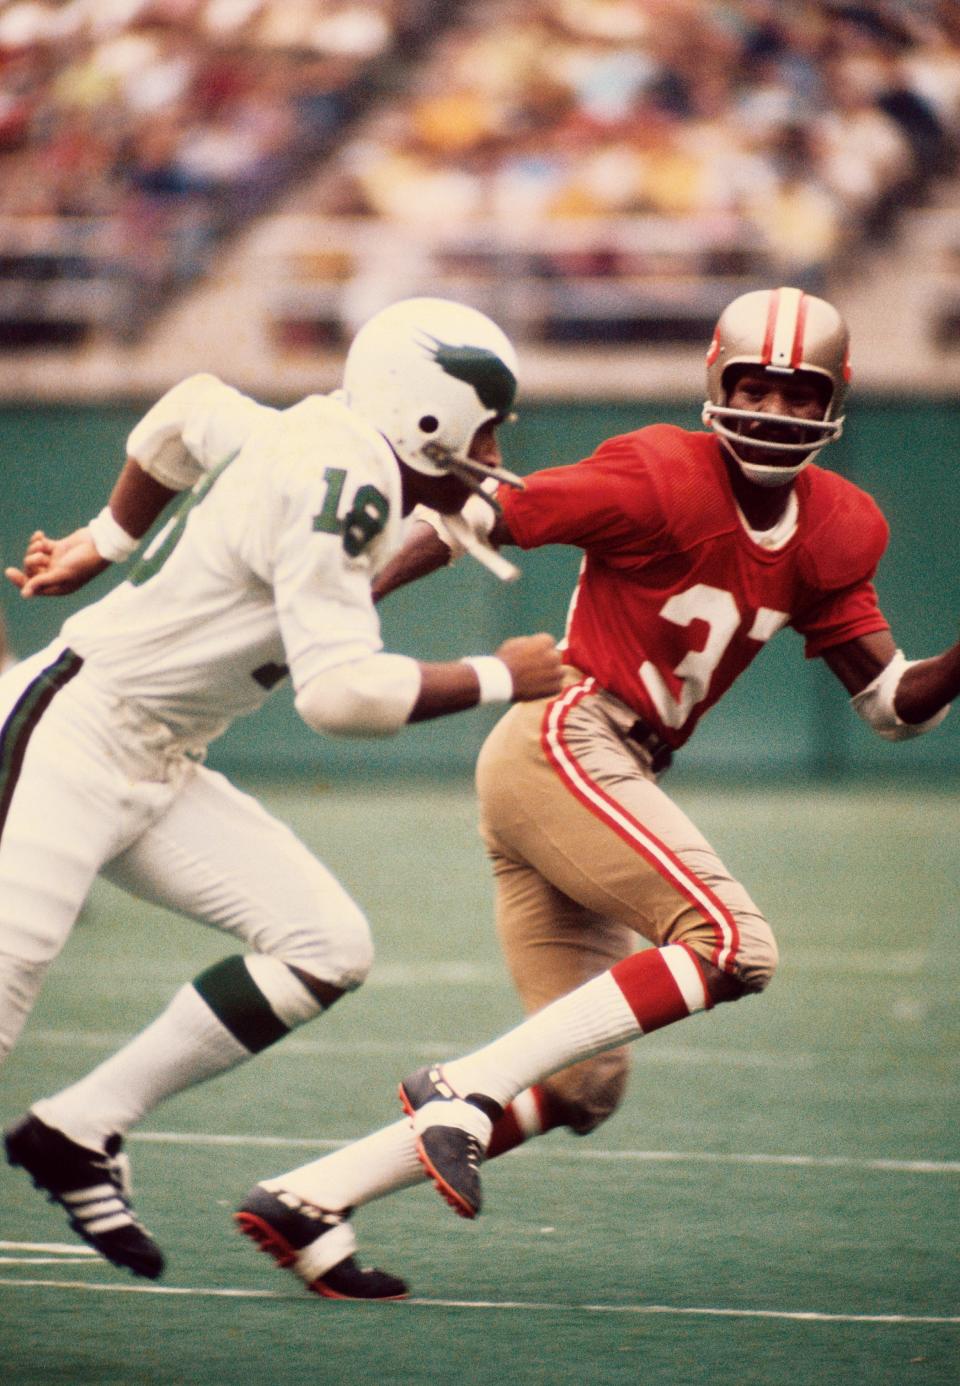 Jimmy Johnson played for the 49ers from 1961-1976 and was inducted into the Hall of Fame in 1994.